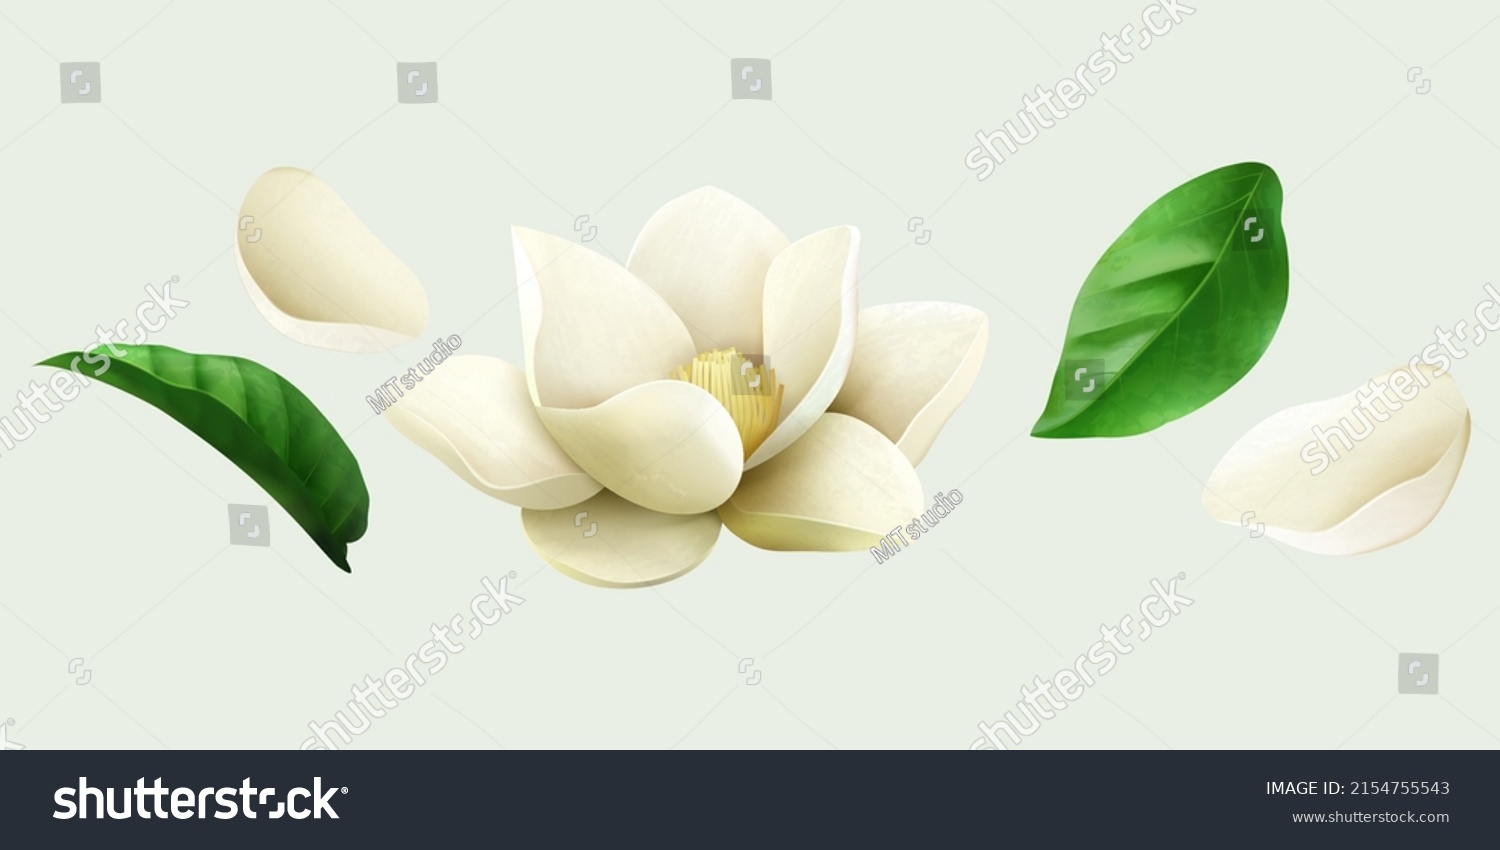 White jasmine drawings including flower bud, fresh leaves and petals. Floral elements isolated on light green background. Suitable for cosmetic or wedding decoration. #2154755543